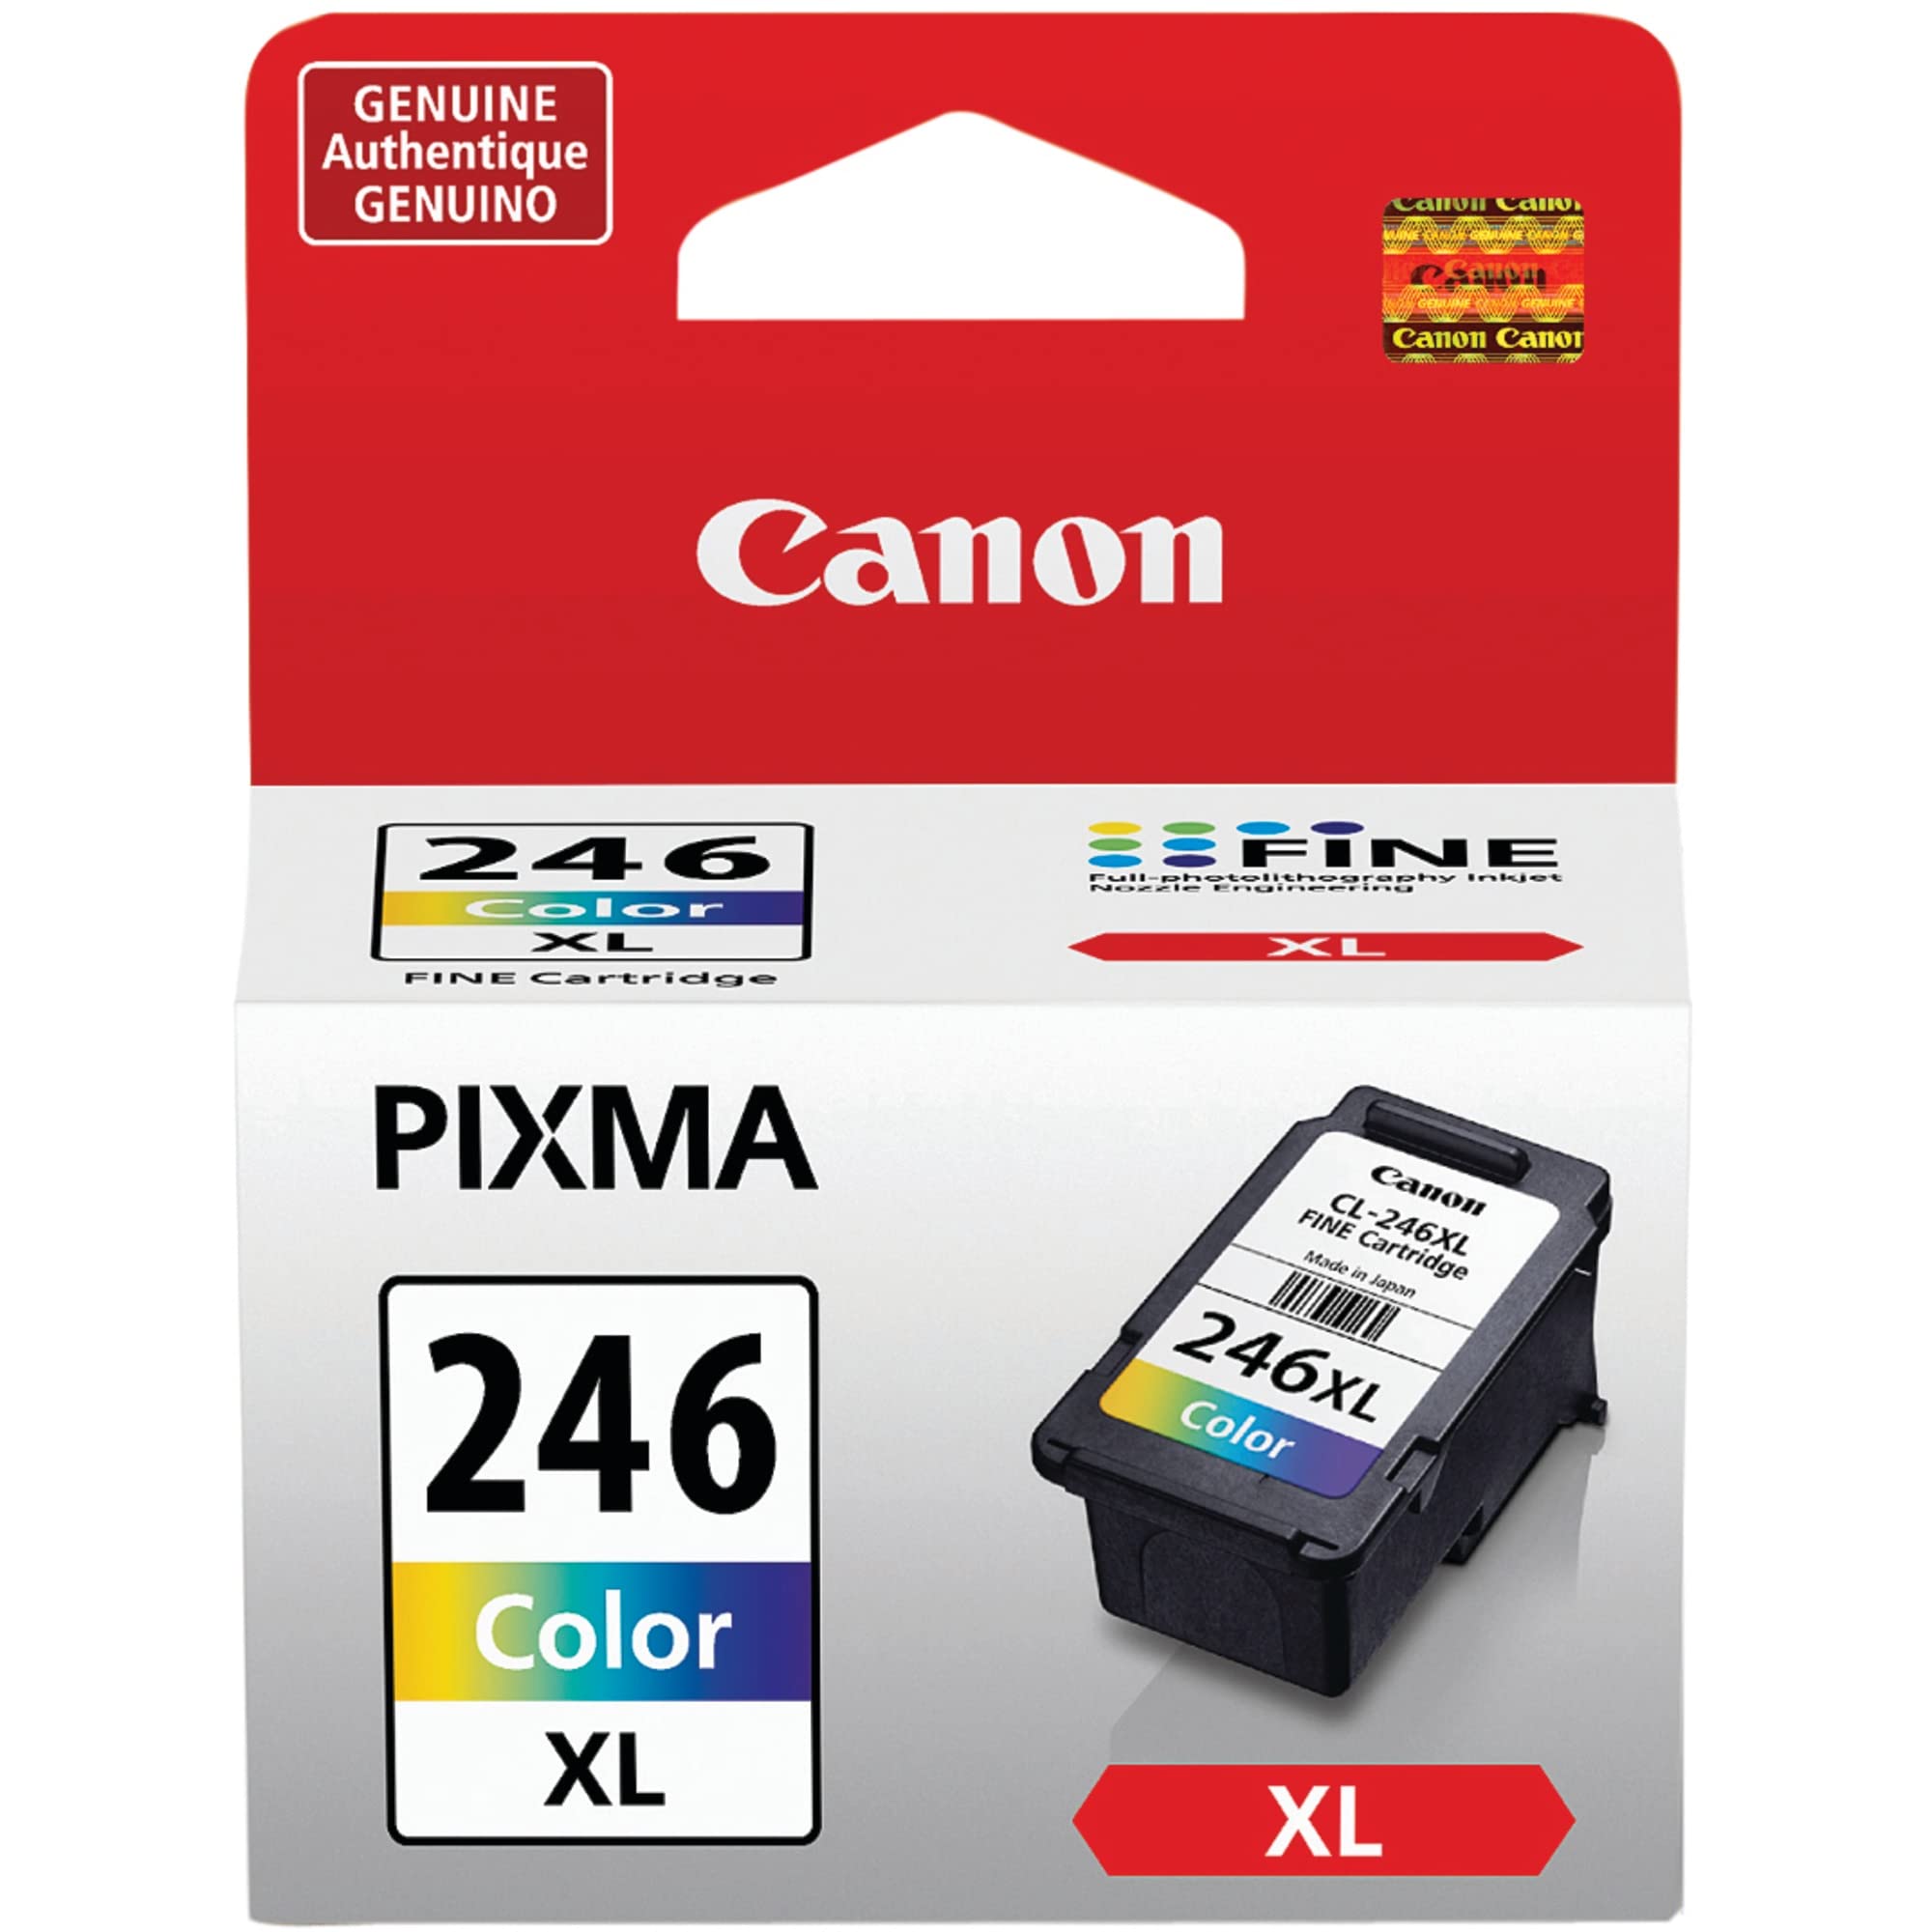 12-superior-cannon-printer-ink-246-for-2023